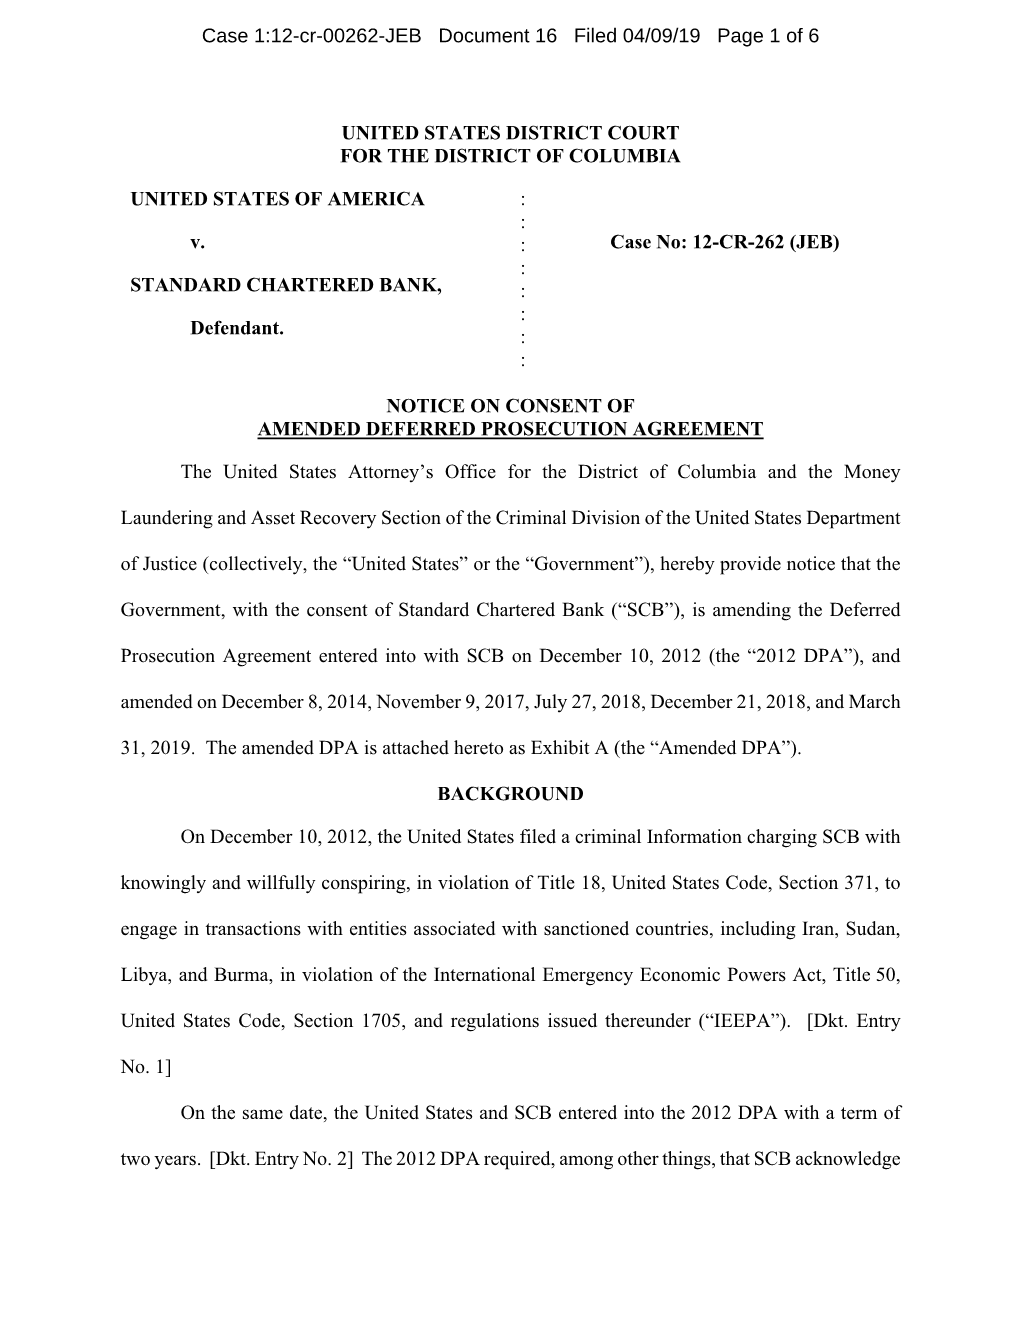 Case 1:12-Cr-00262-JEB Document 16 Filed 04/09/19 Page 1 of 6